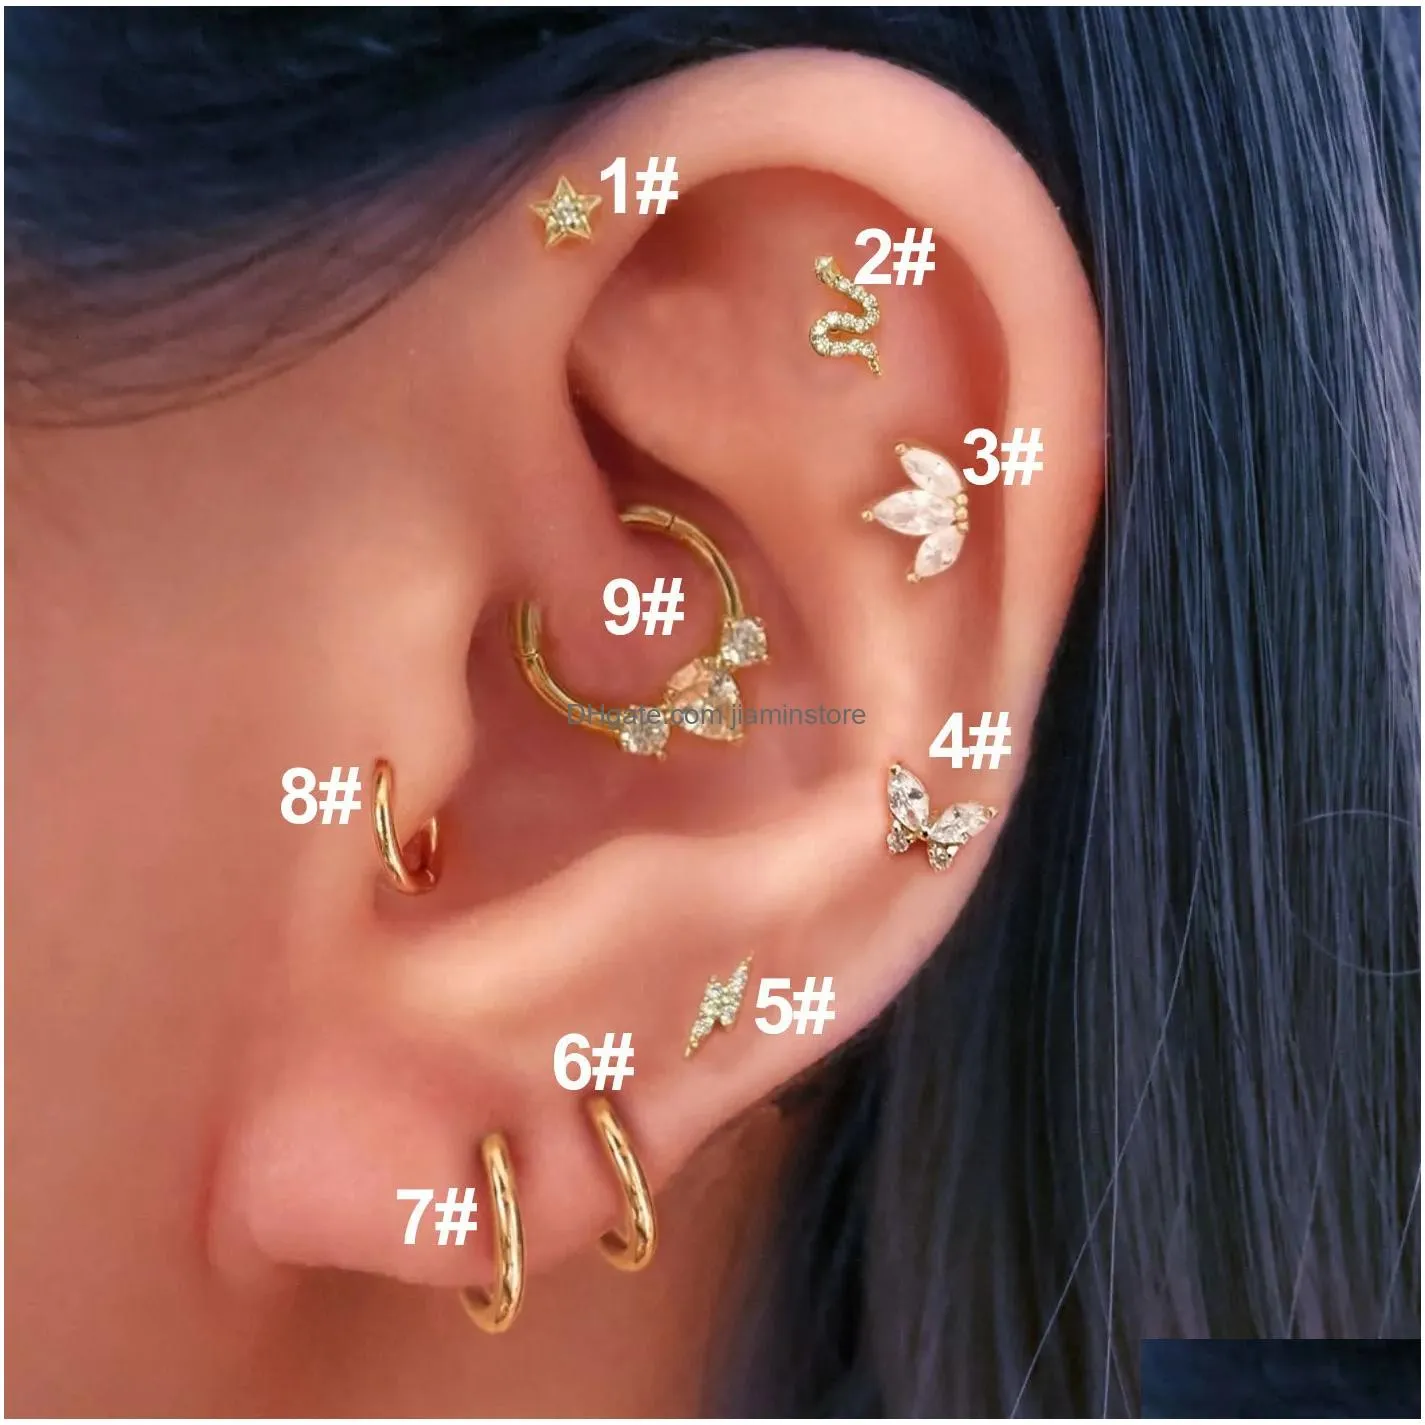 Nose Rings & Studs Nose Rings Studs Daith Stainless Steel Hoop Piercing Earrings For Women Star Tragus Helix Lobe Cartilage Ear Ring Dhrow